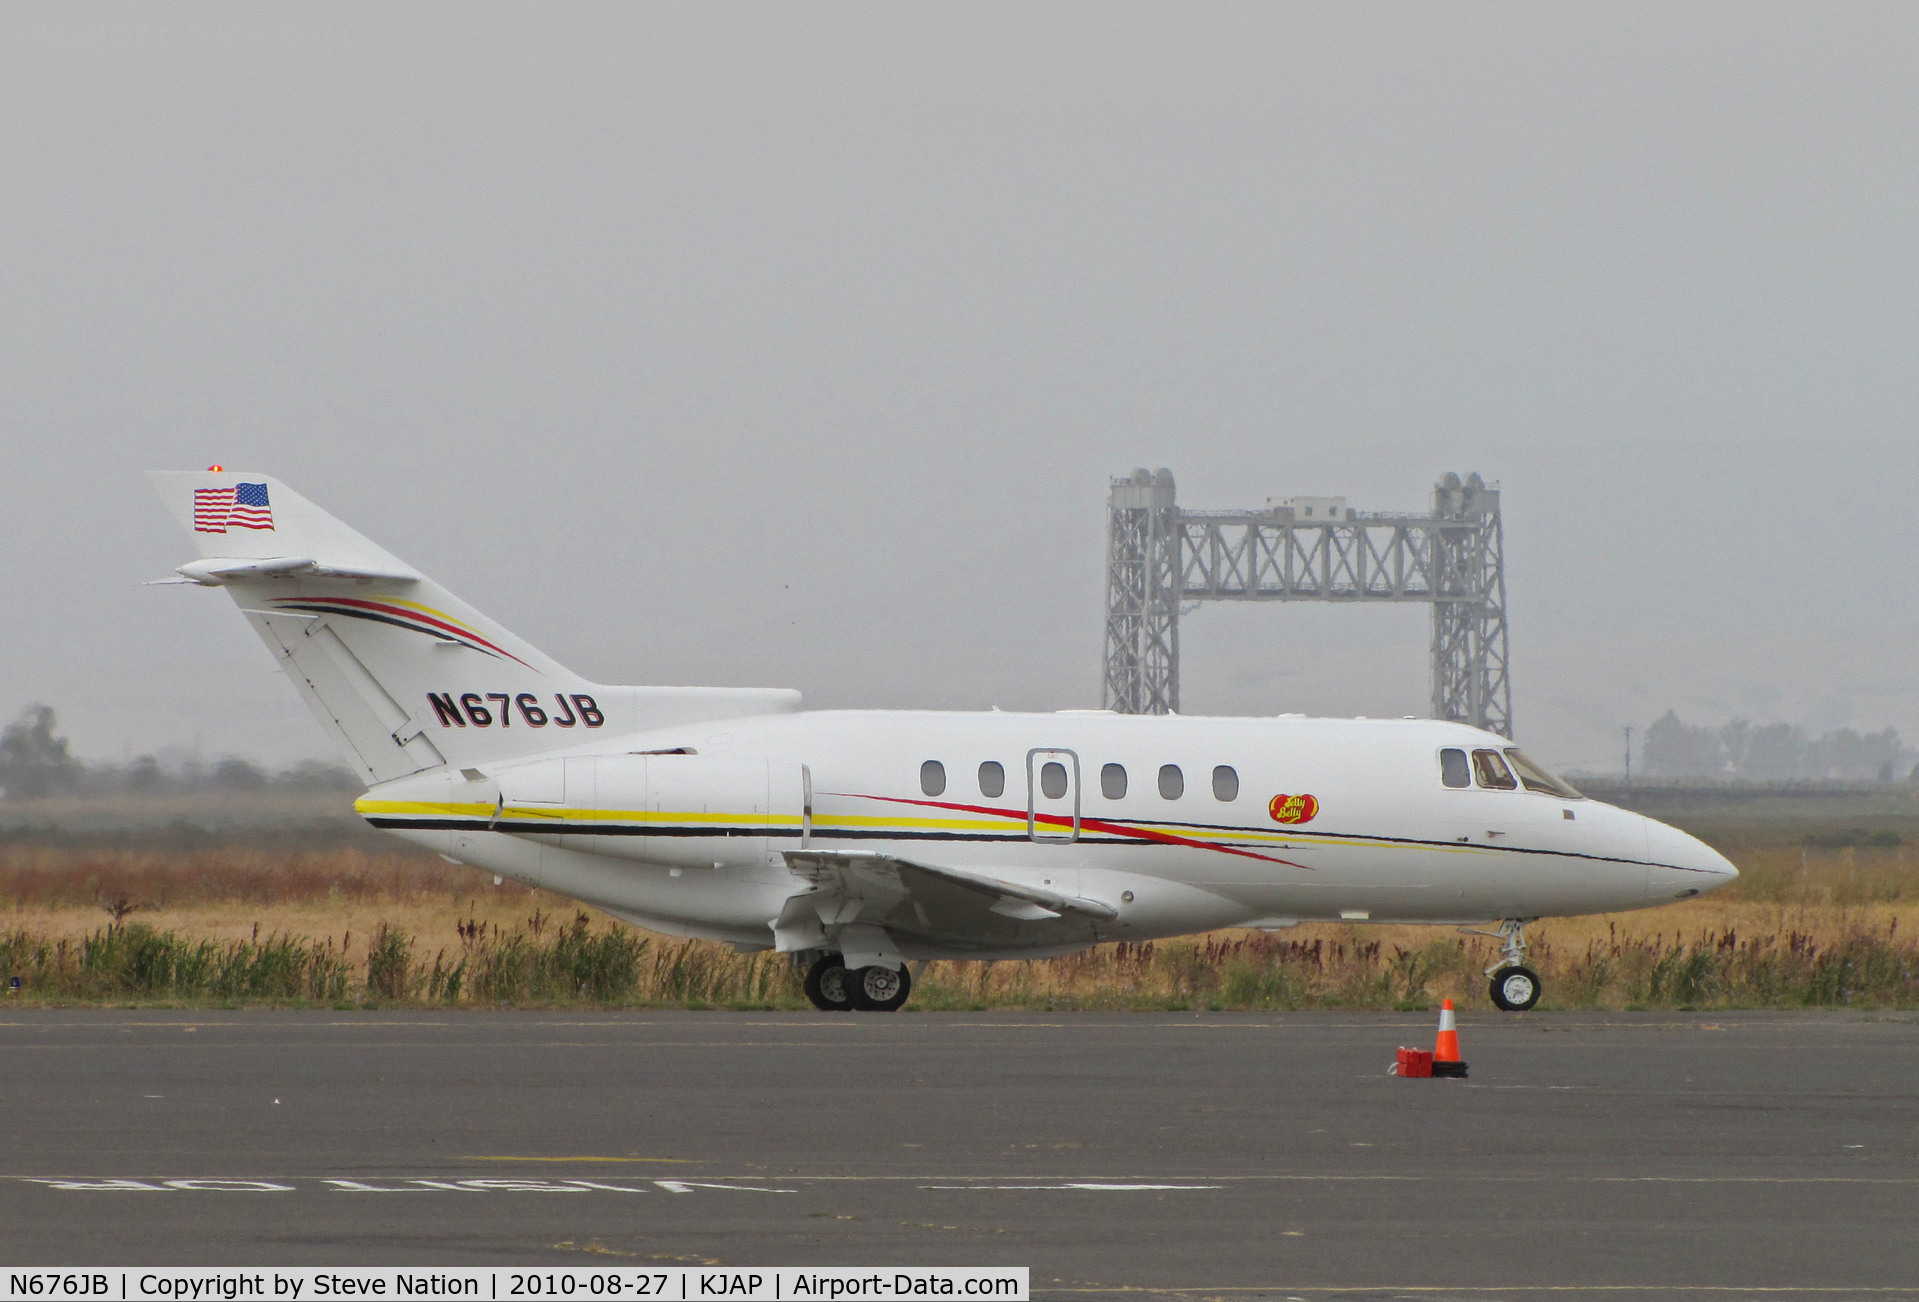 N676JB, 2003 Raytheon Hawker 800XP C/N 258619, Jelly Belly Candy (Fairfield, CA) 2003 Hawker 800XP taxing past Napa River RR bridge on departure for KGPI (Glacier Park Int'l Airport, Kalispell, MT) as 